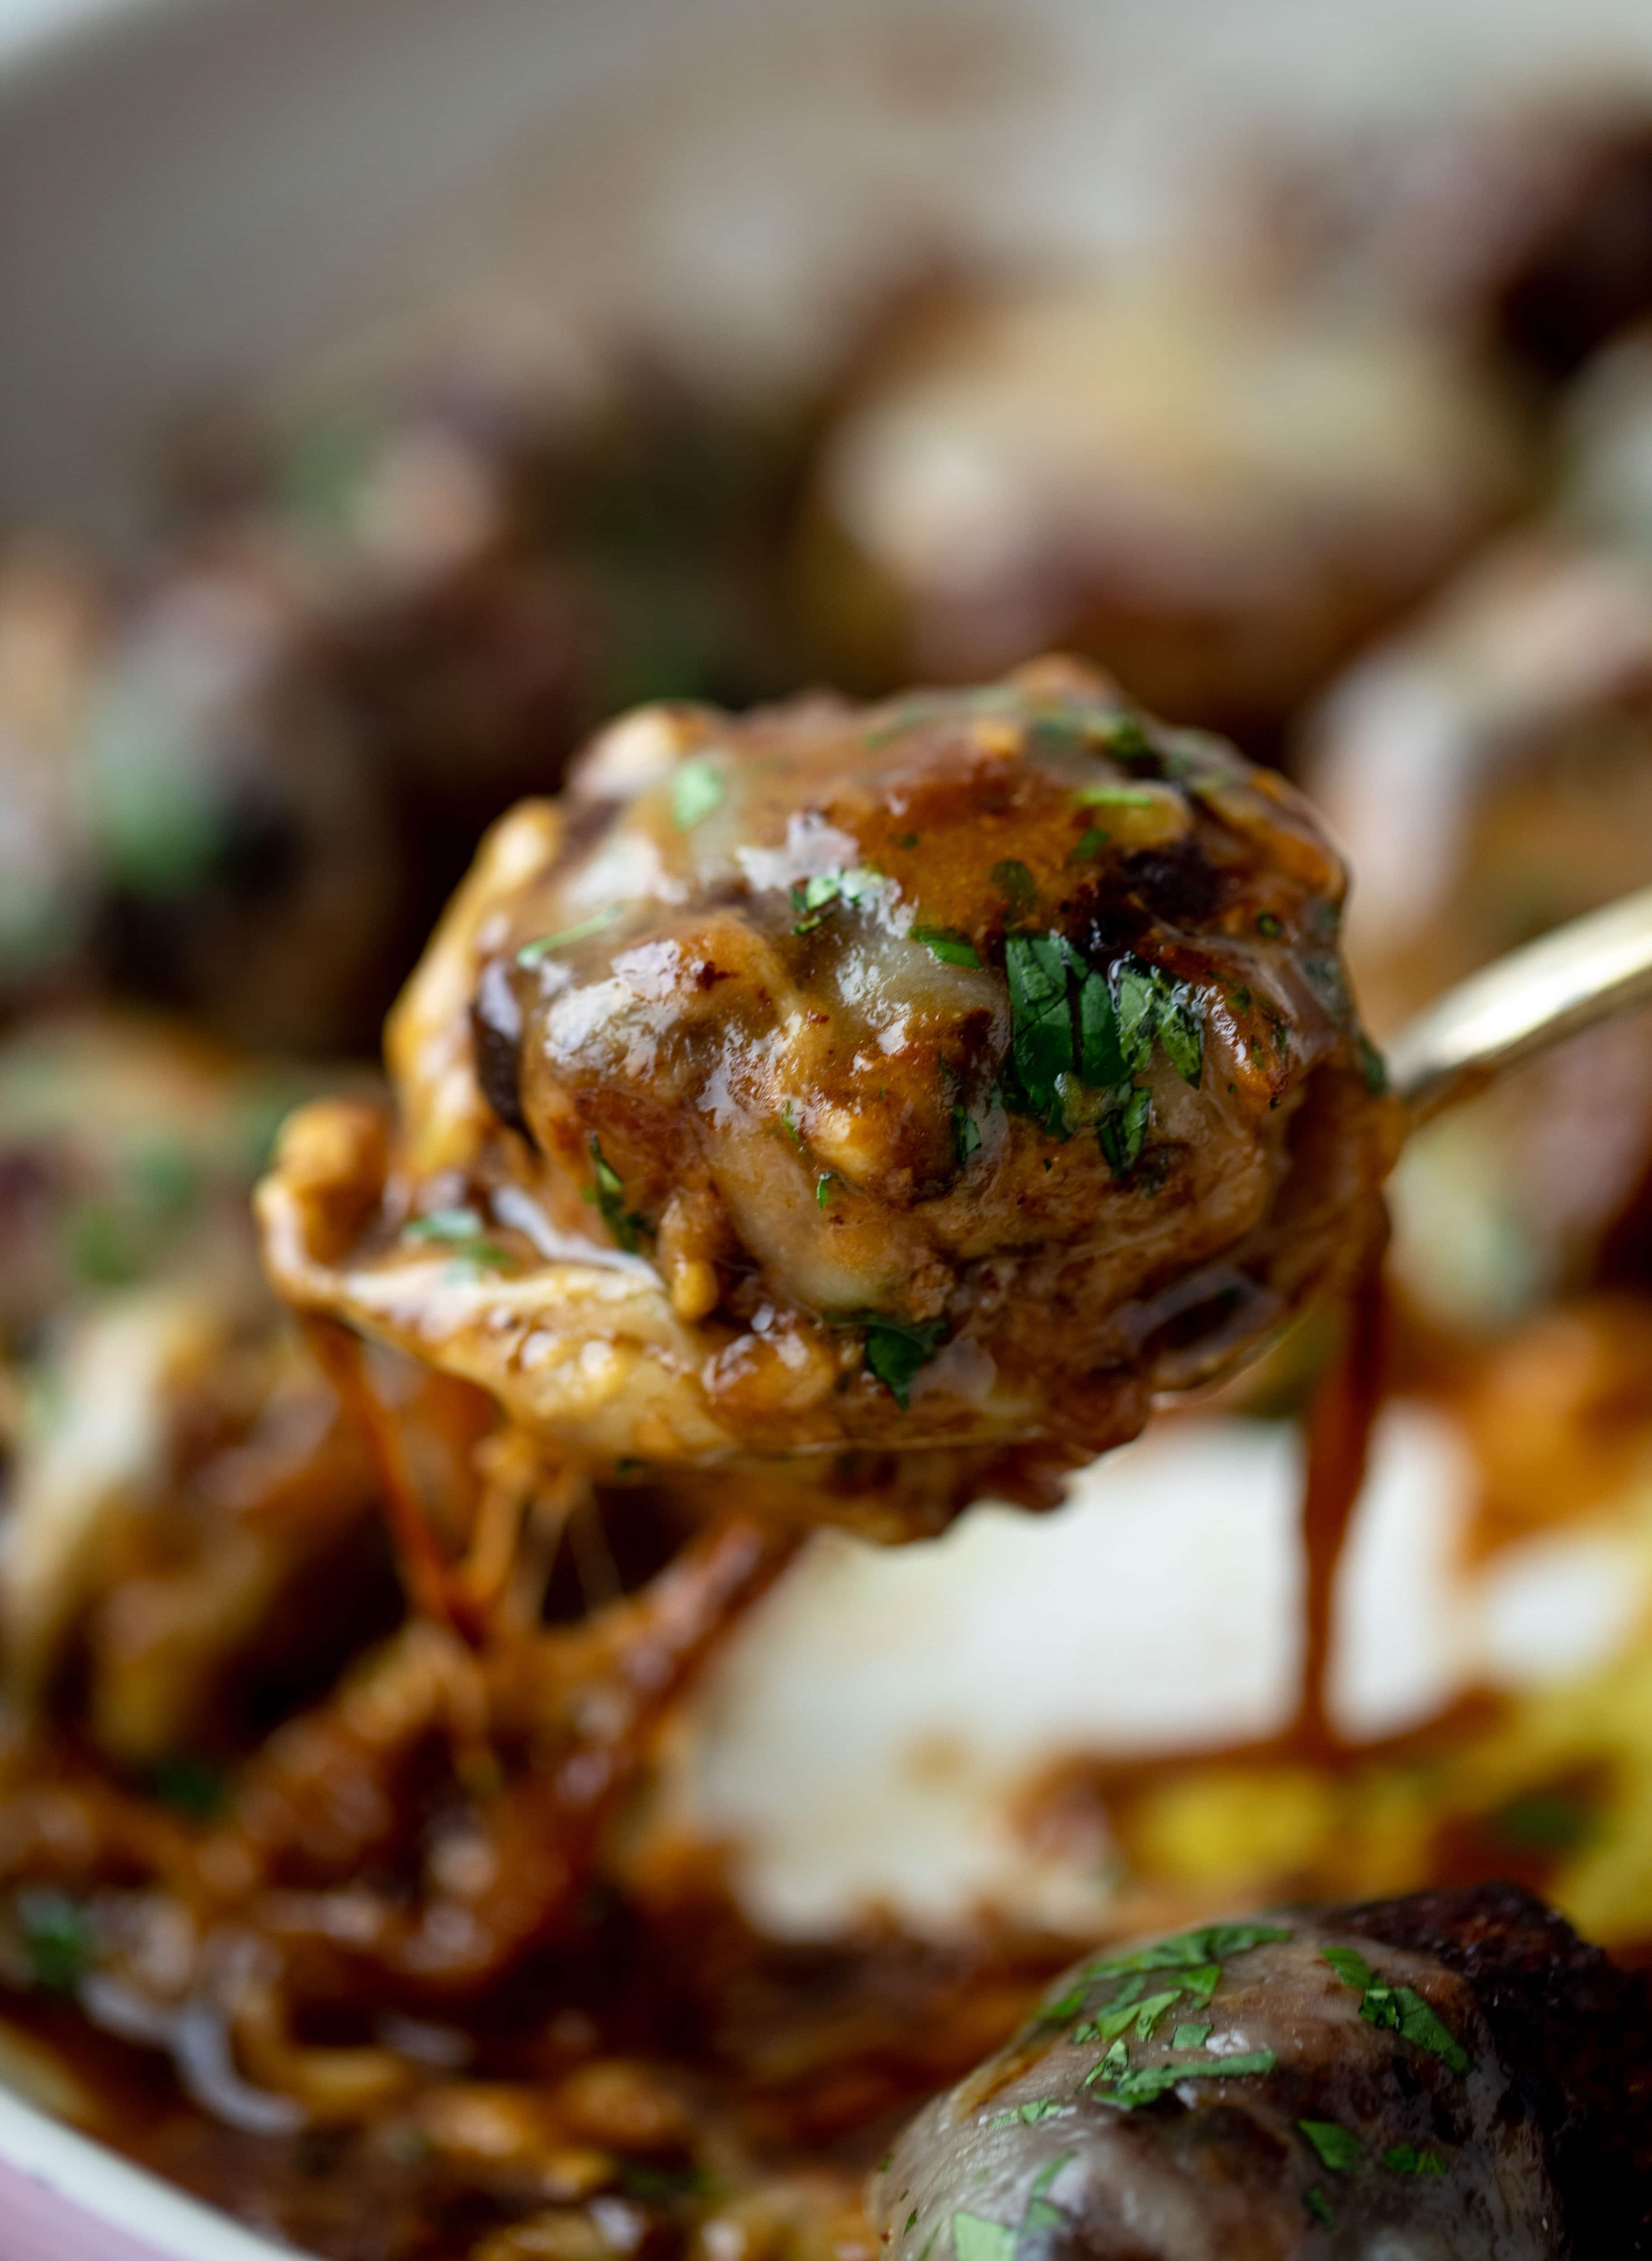 These french onion meatballs are super delicious! All the flavors of french onion soup made into juicy meatballs. Cheesy, saucy goodness!